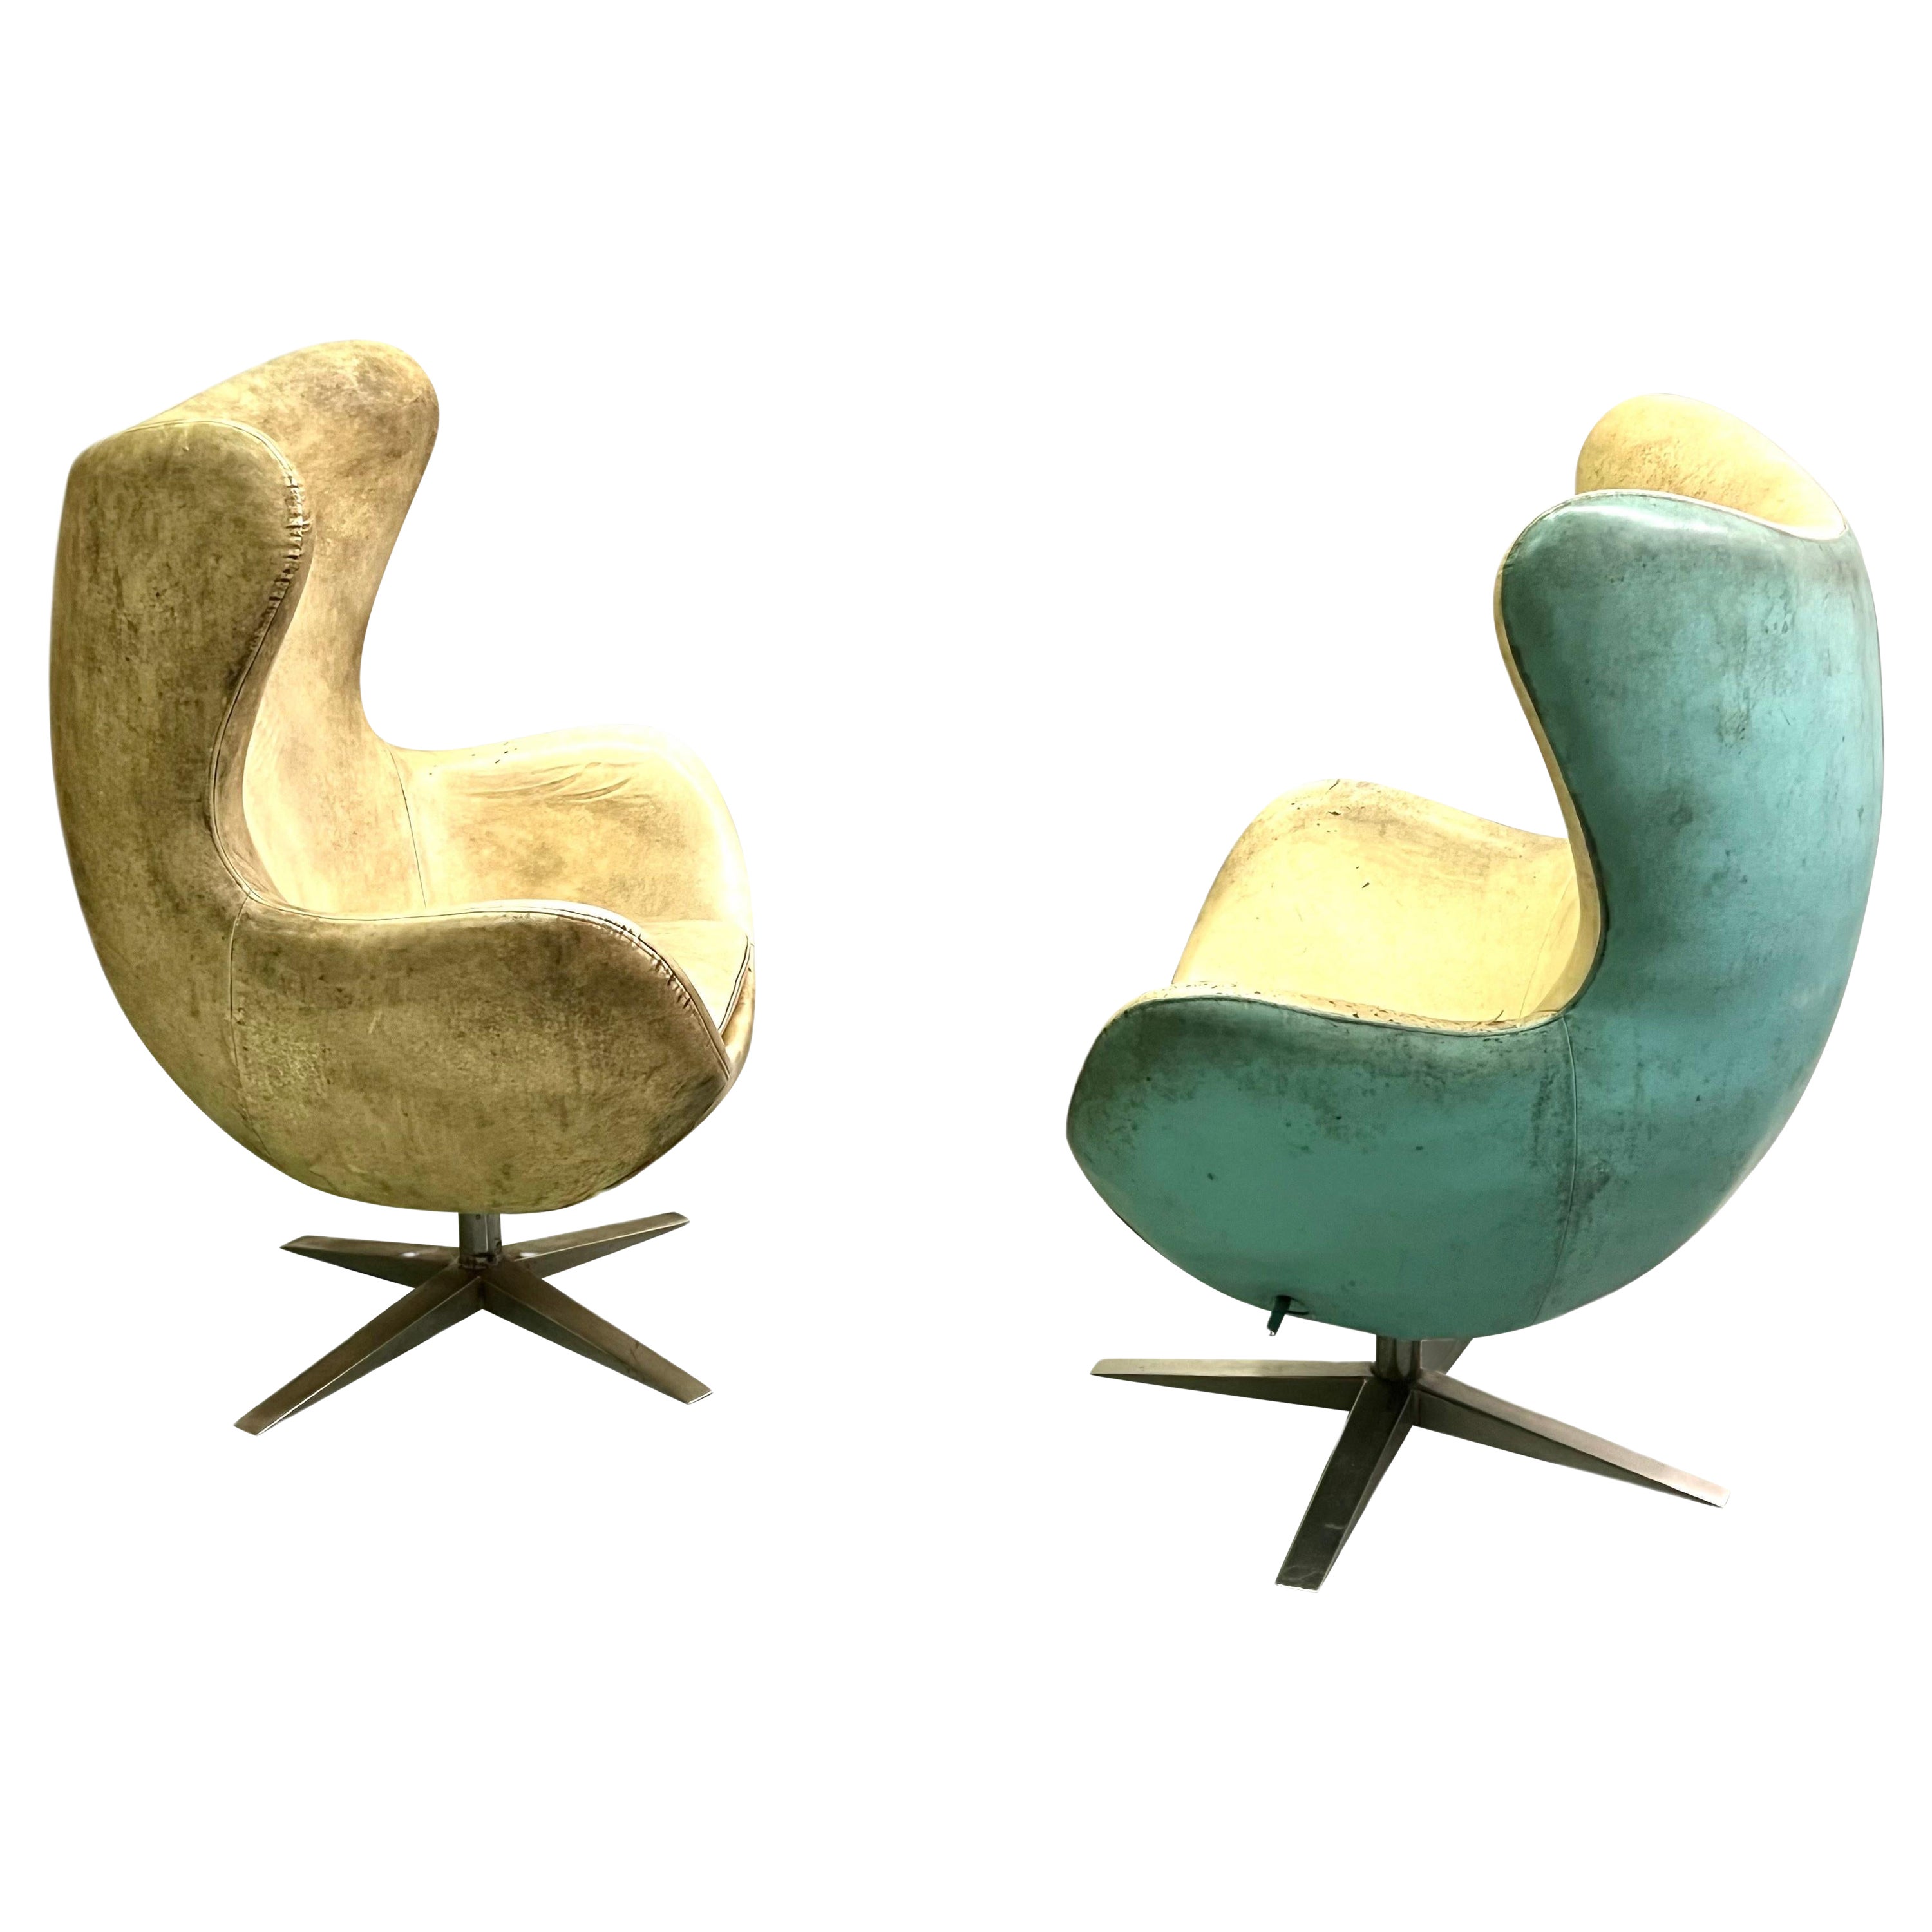 Early Model, Pair of Vintage Leather Danish Egg Chair, Arne Jacobsen, c. 1960 For Sale